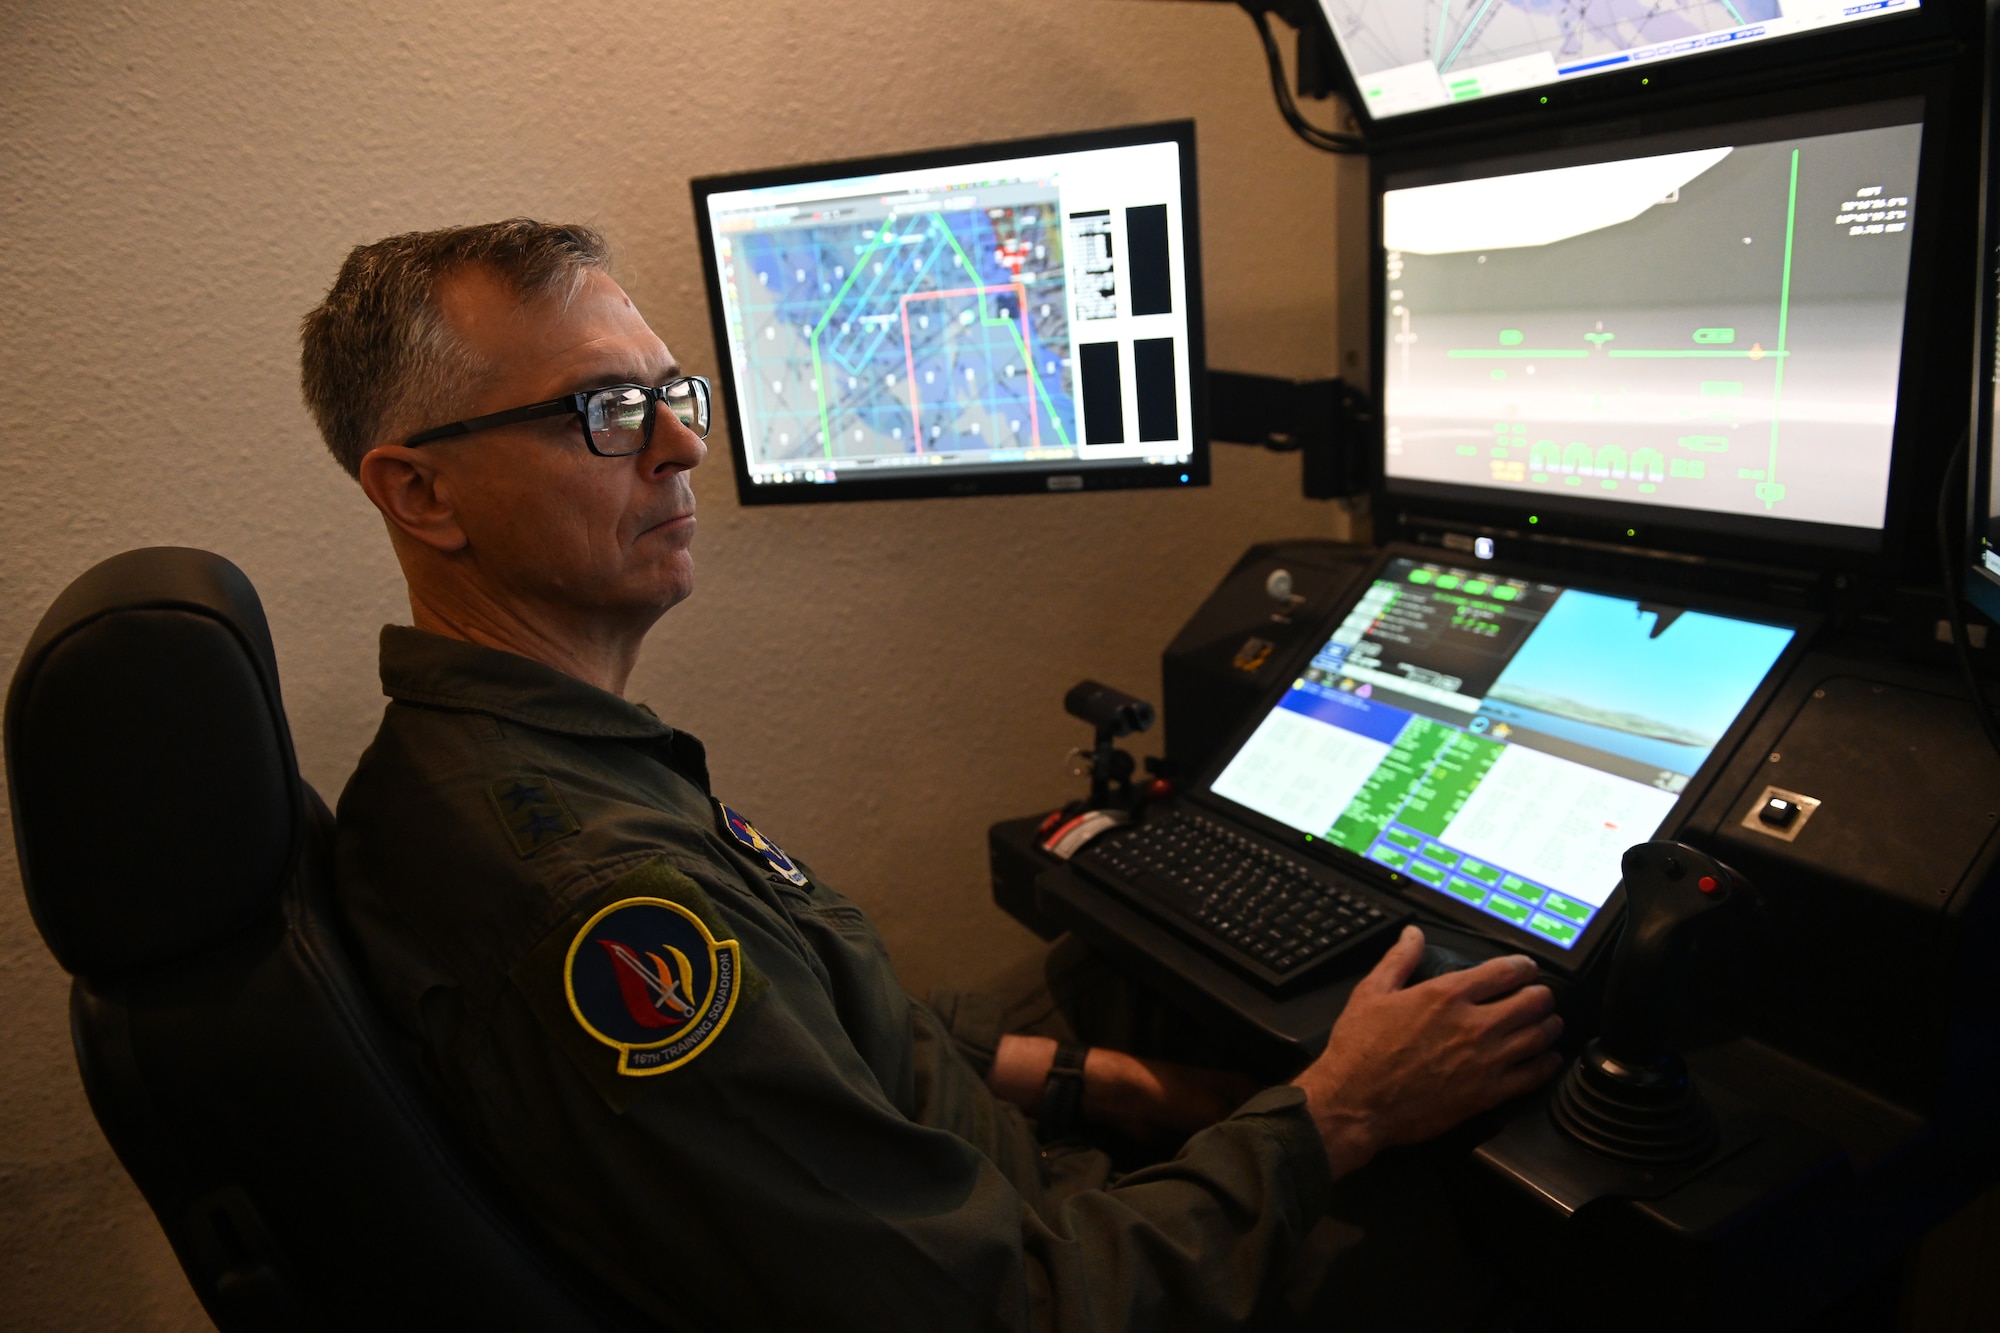 Maj. Gen. Craig D. Wills, 19th Air Force commander, flies an MQ-9 Reaper simulator, July 20, 2021, on Holloman Air Force Base, N.M. The command team held three all-calls with the wing, and spoke on the importance of training, readiness and how our Airmen give the U.S. Air Force a competitive edge in our fight against U.S. adversaries. (U.S. Air Force photo by Staff Sgt. Christopher S. Sparks)